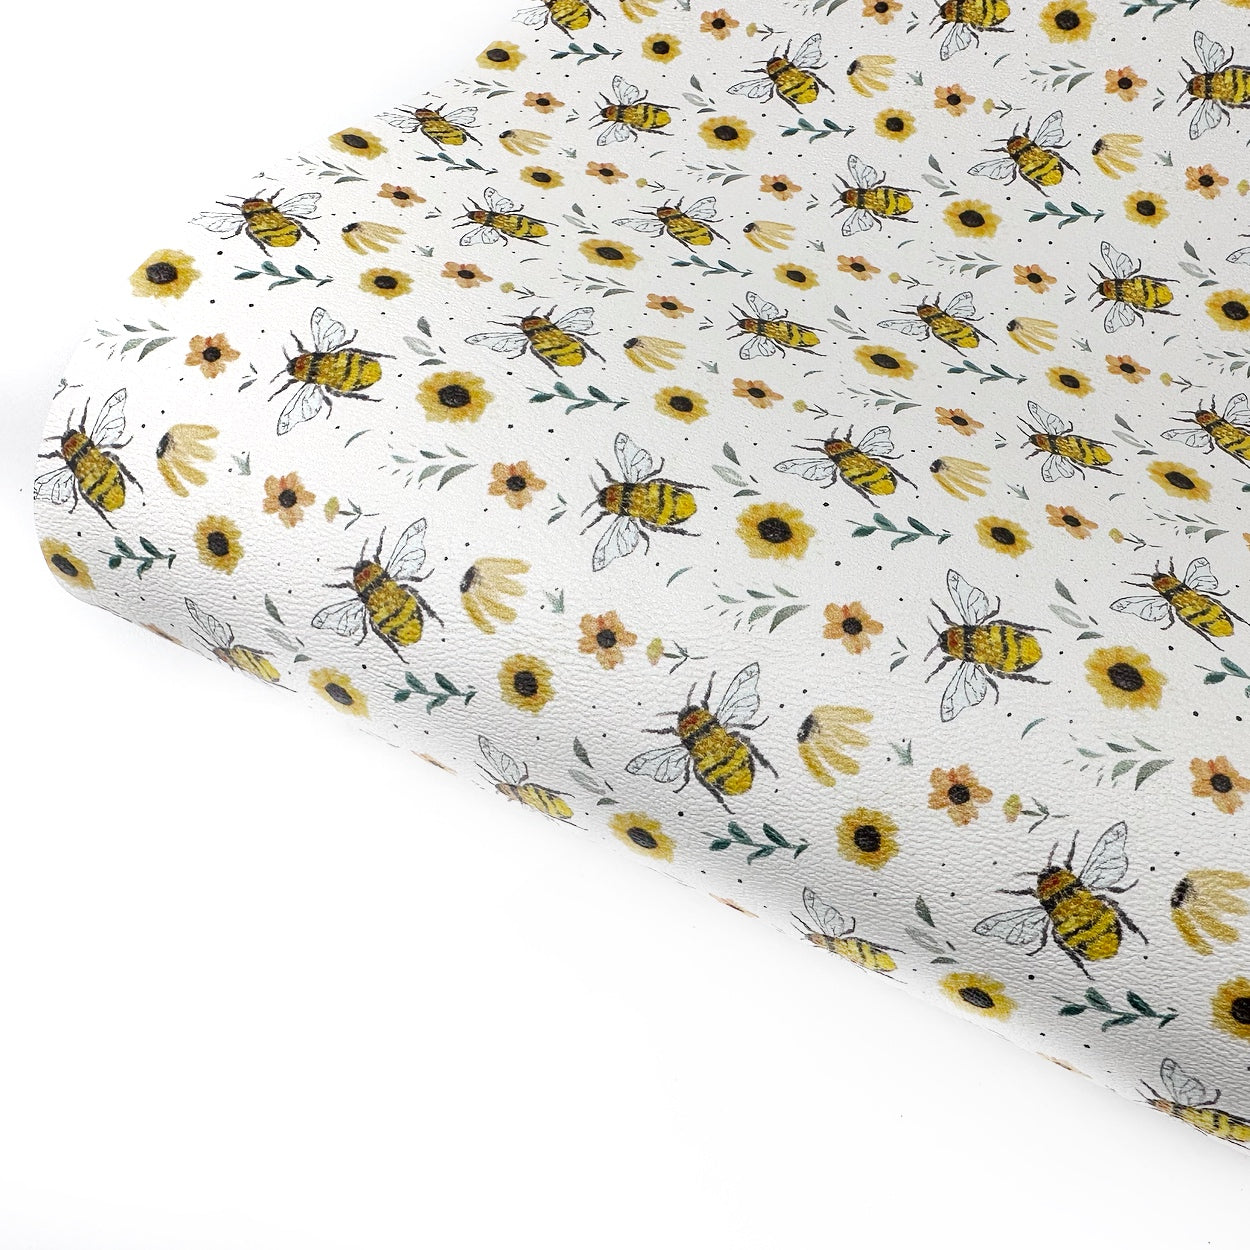 Little Honey Bee Premium Faux Leather Fabric Sheets